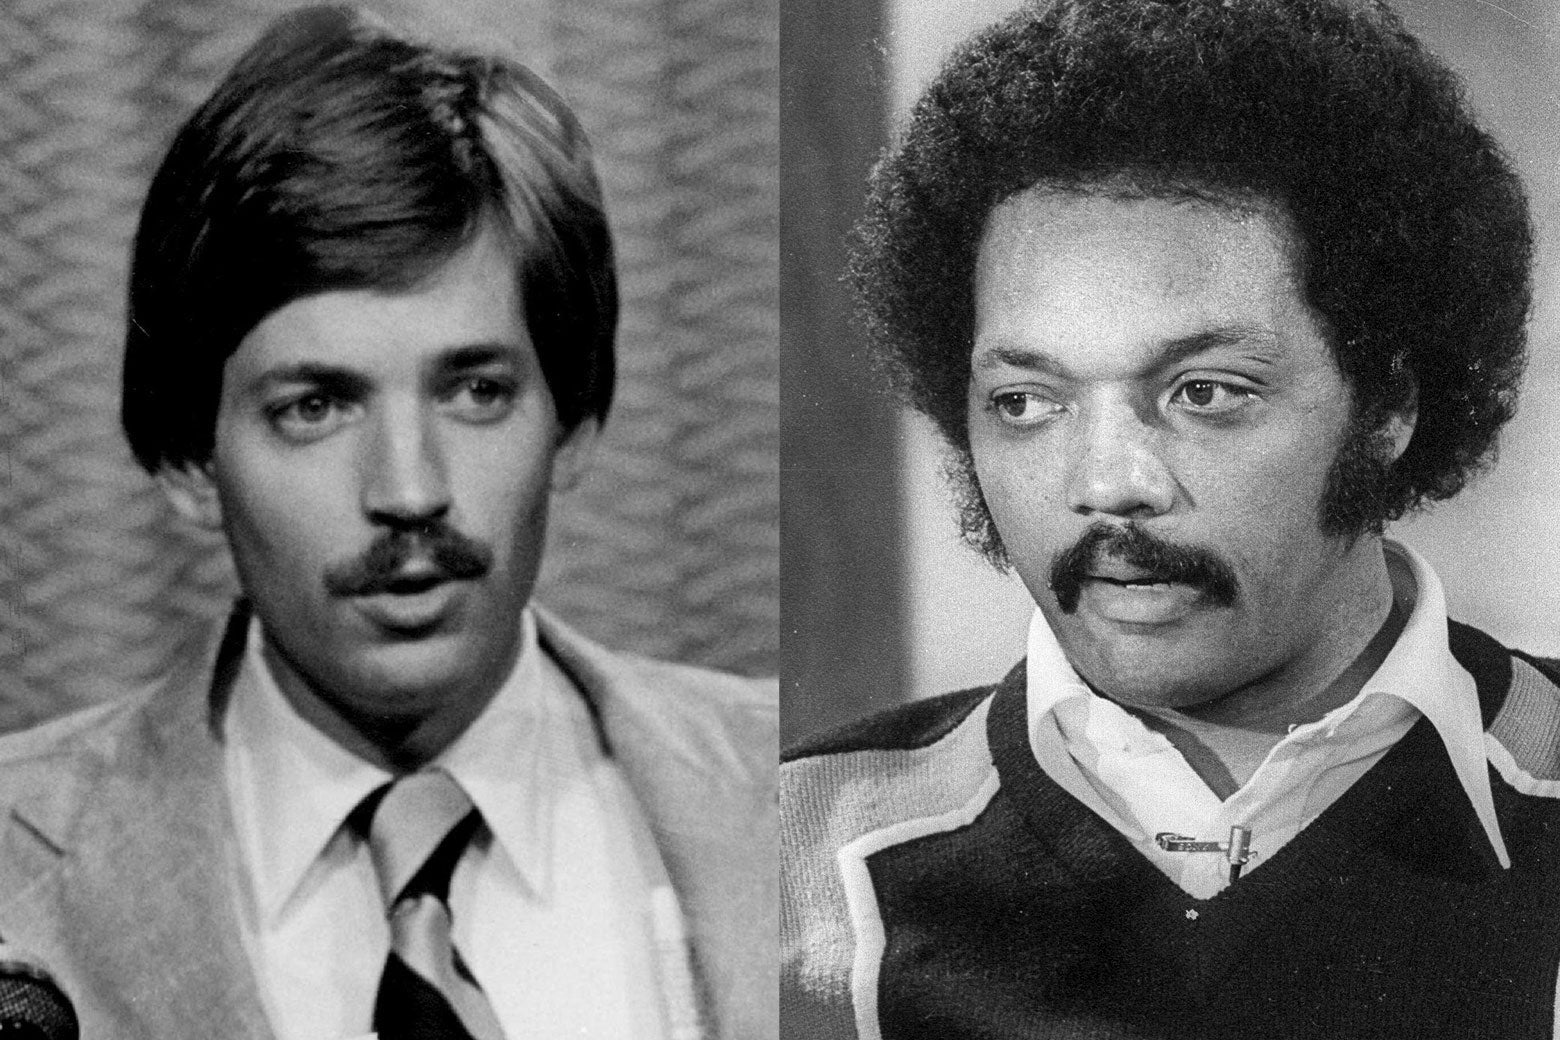 David Duke and Jesse Jackson, side by side, both speaking at press conferences